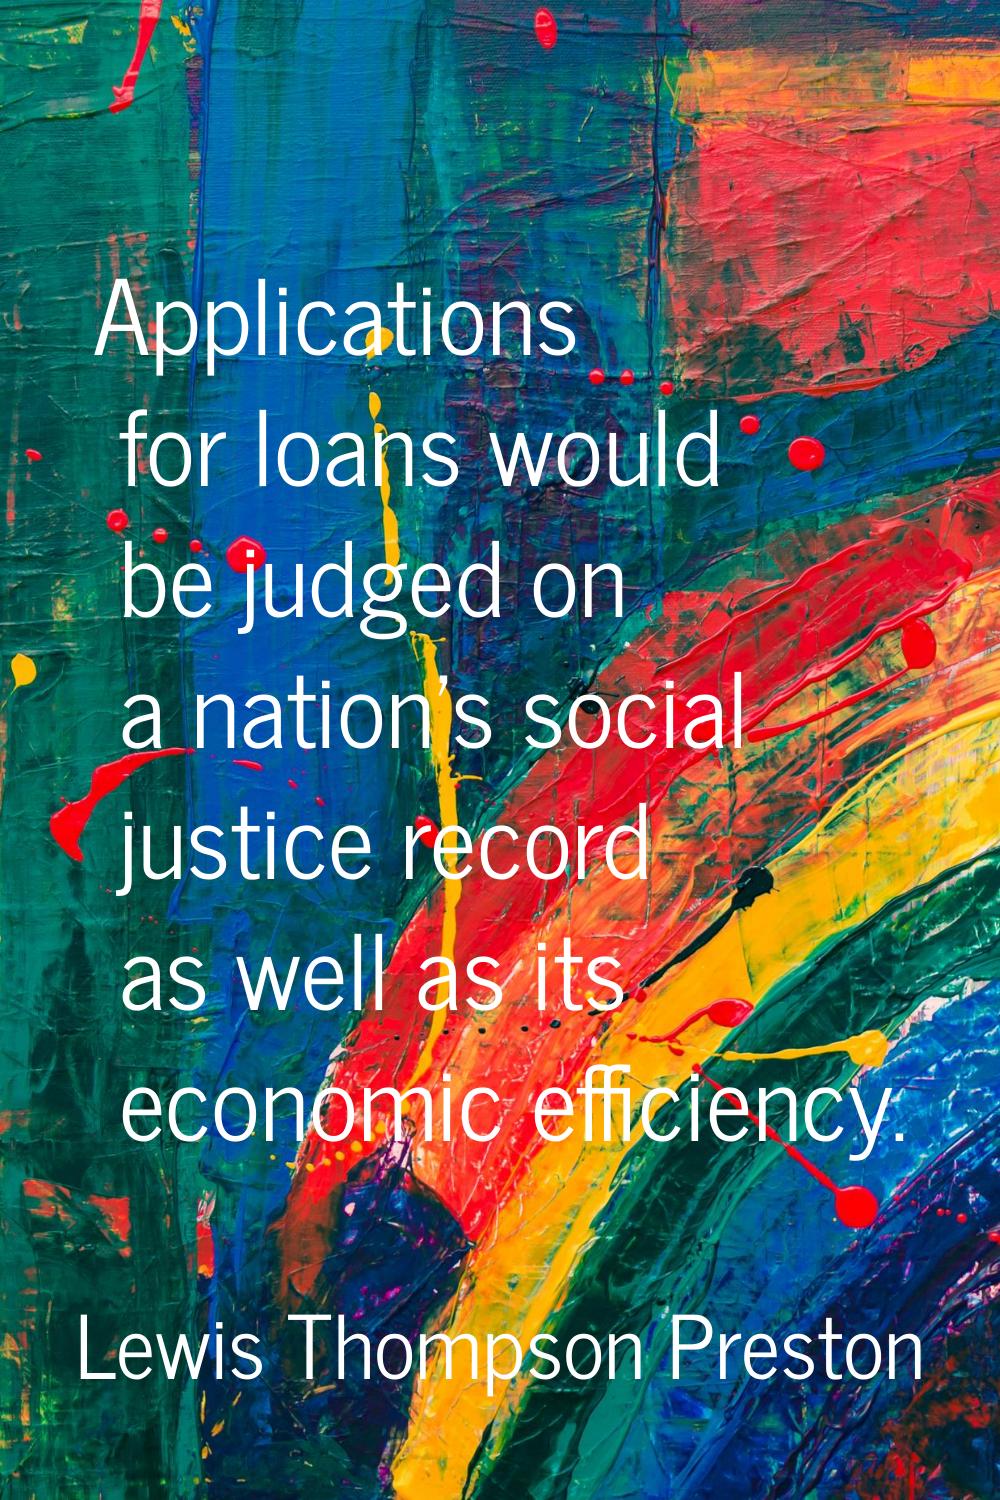 Applications for loans would be judged on a nation's social justice record as well as its economic 